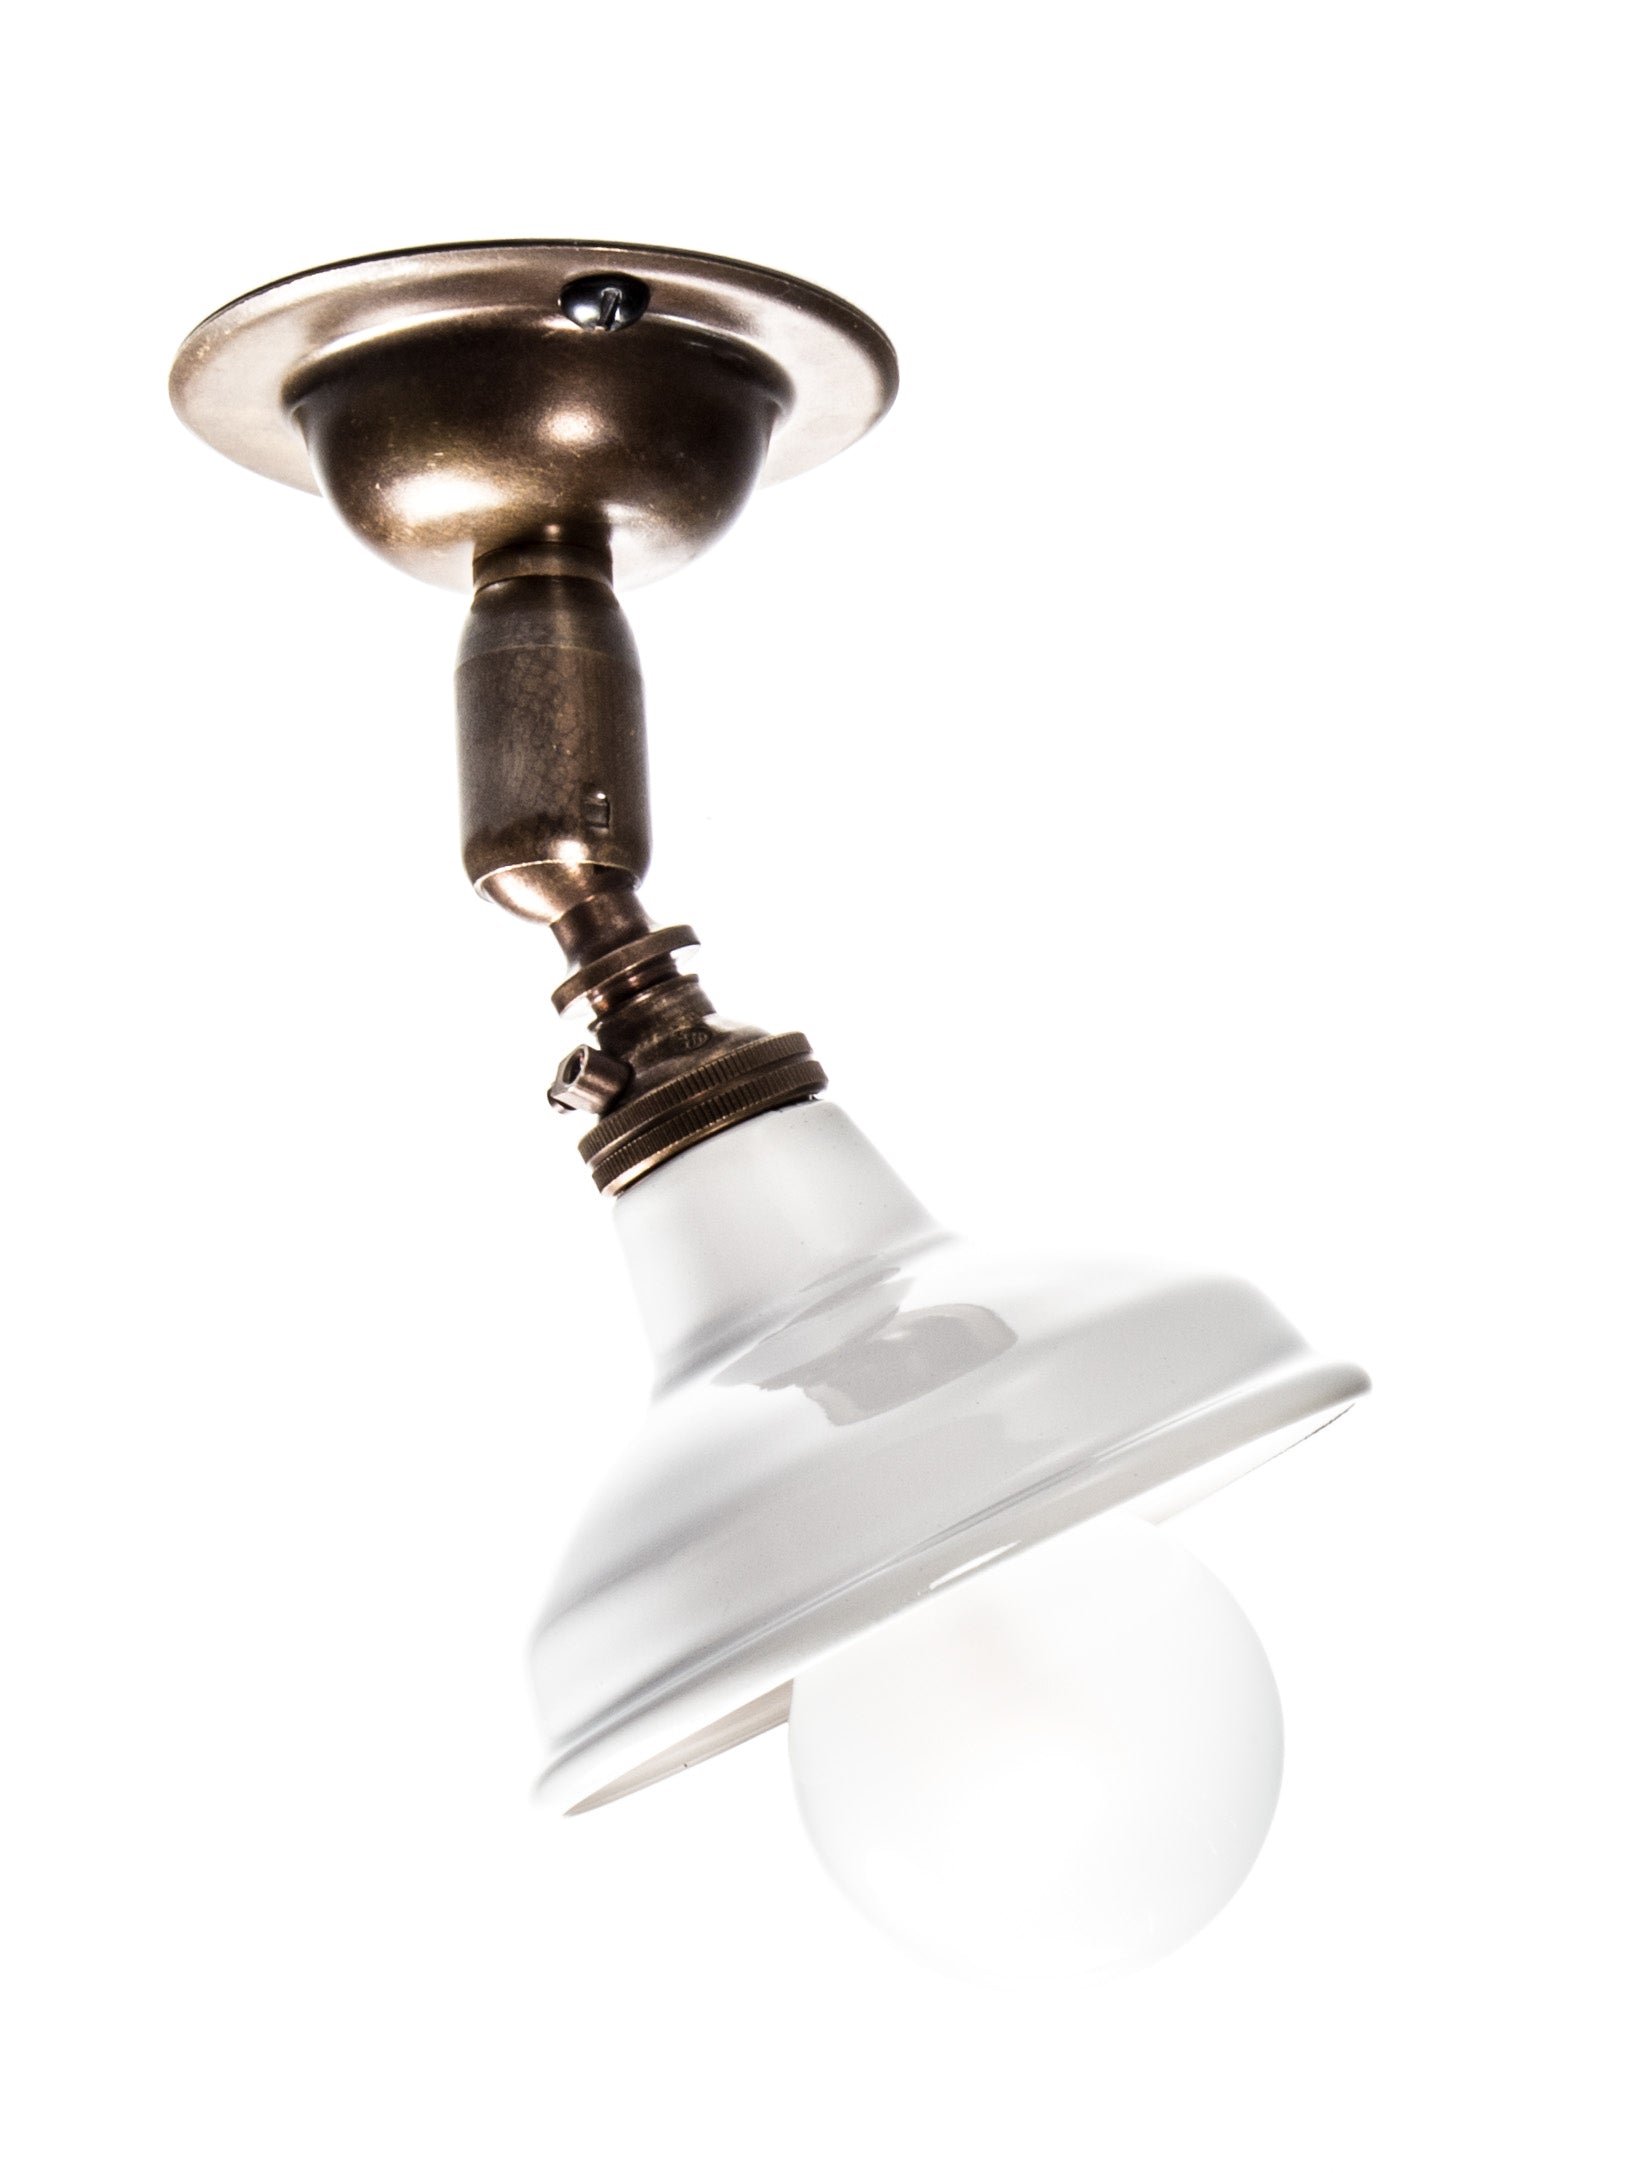 Vintage Brass Maria Spotlight | Ceiling Light With White Shade | End-Of-Line